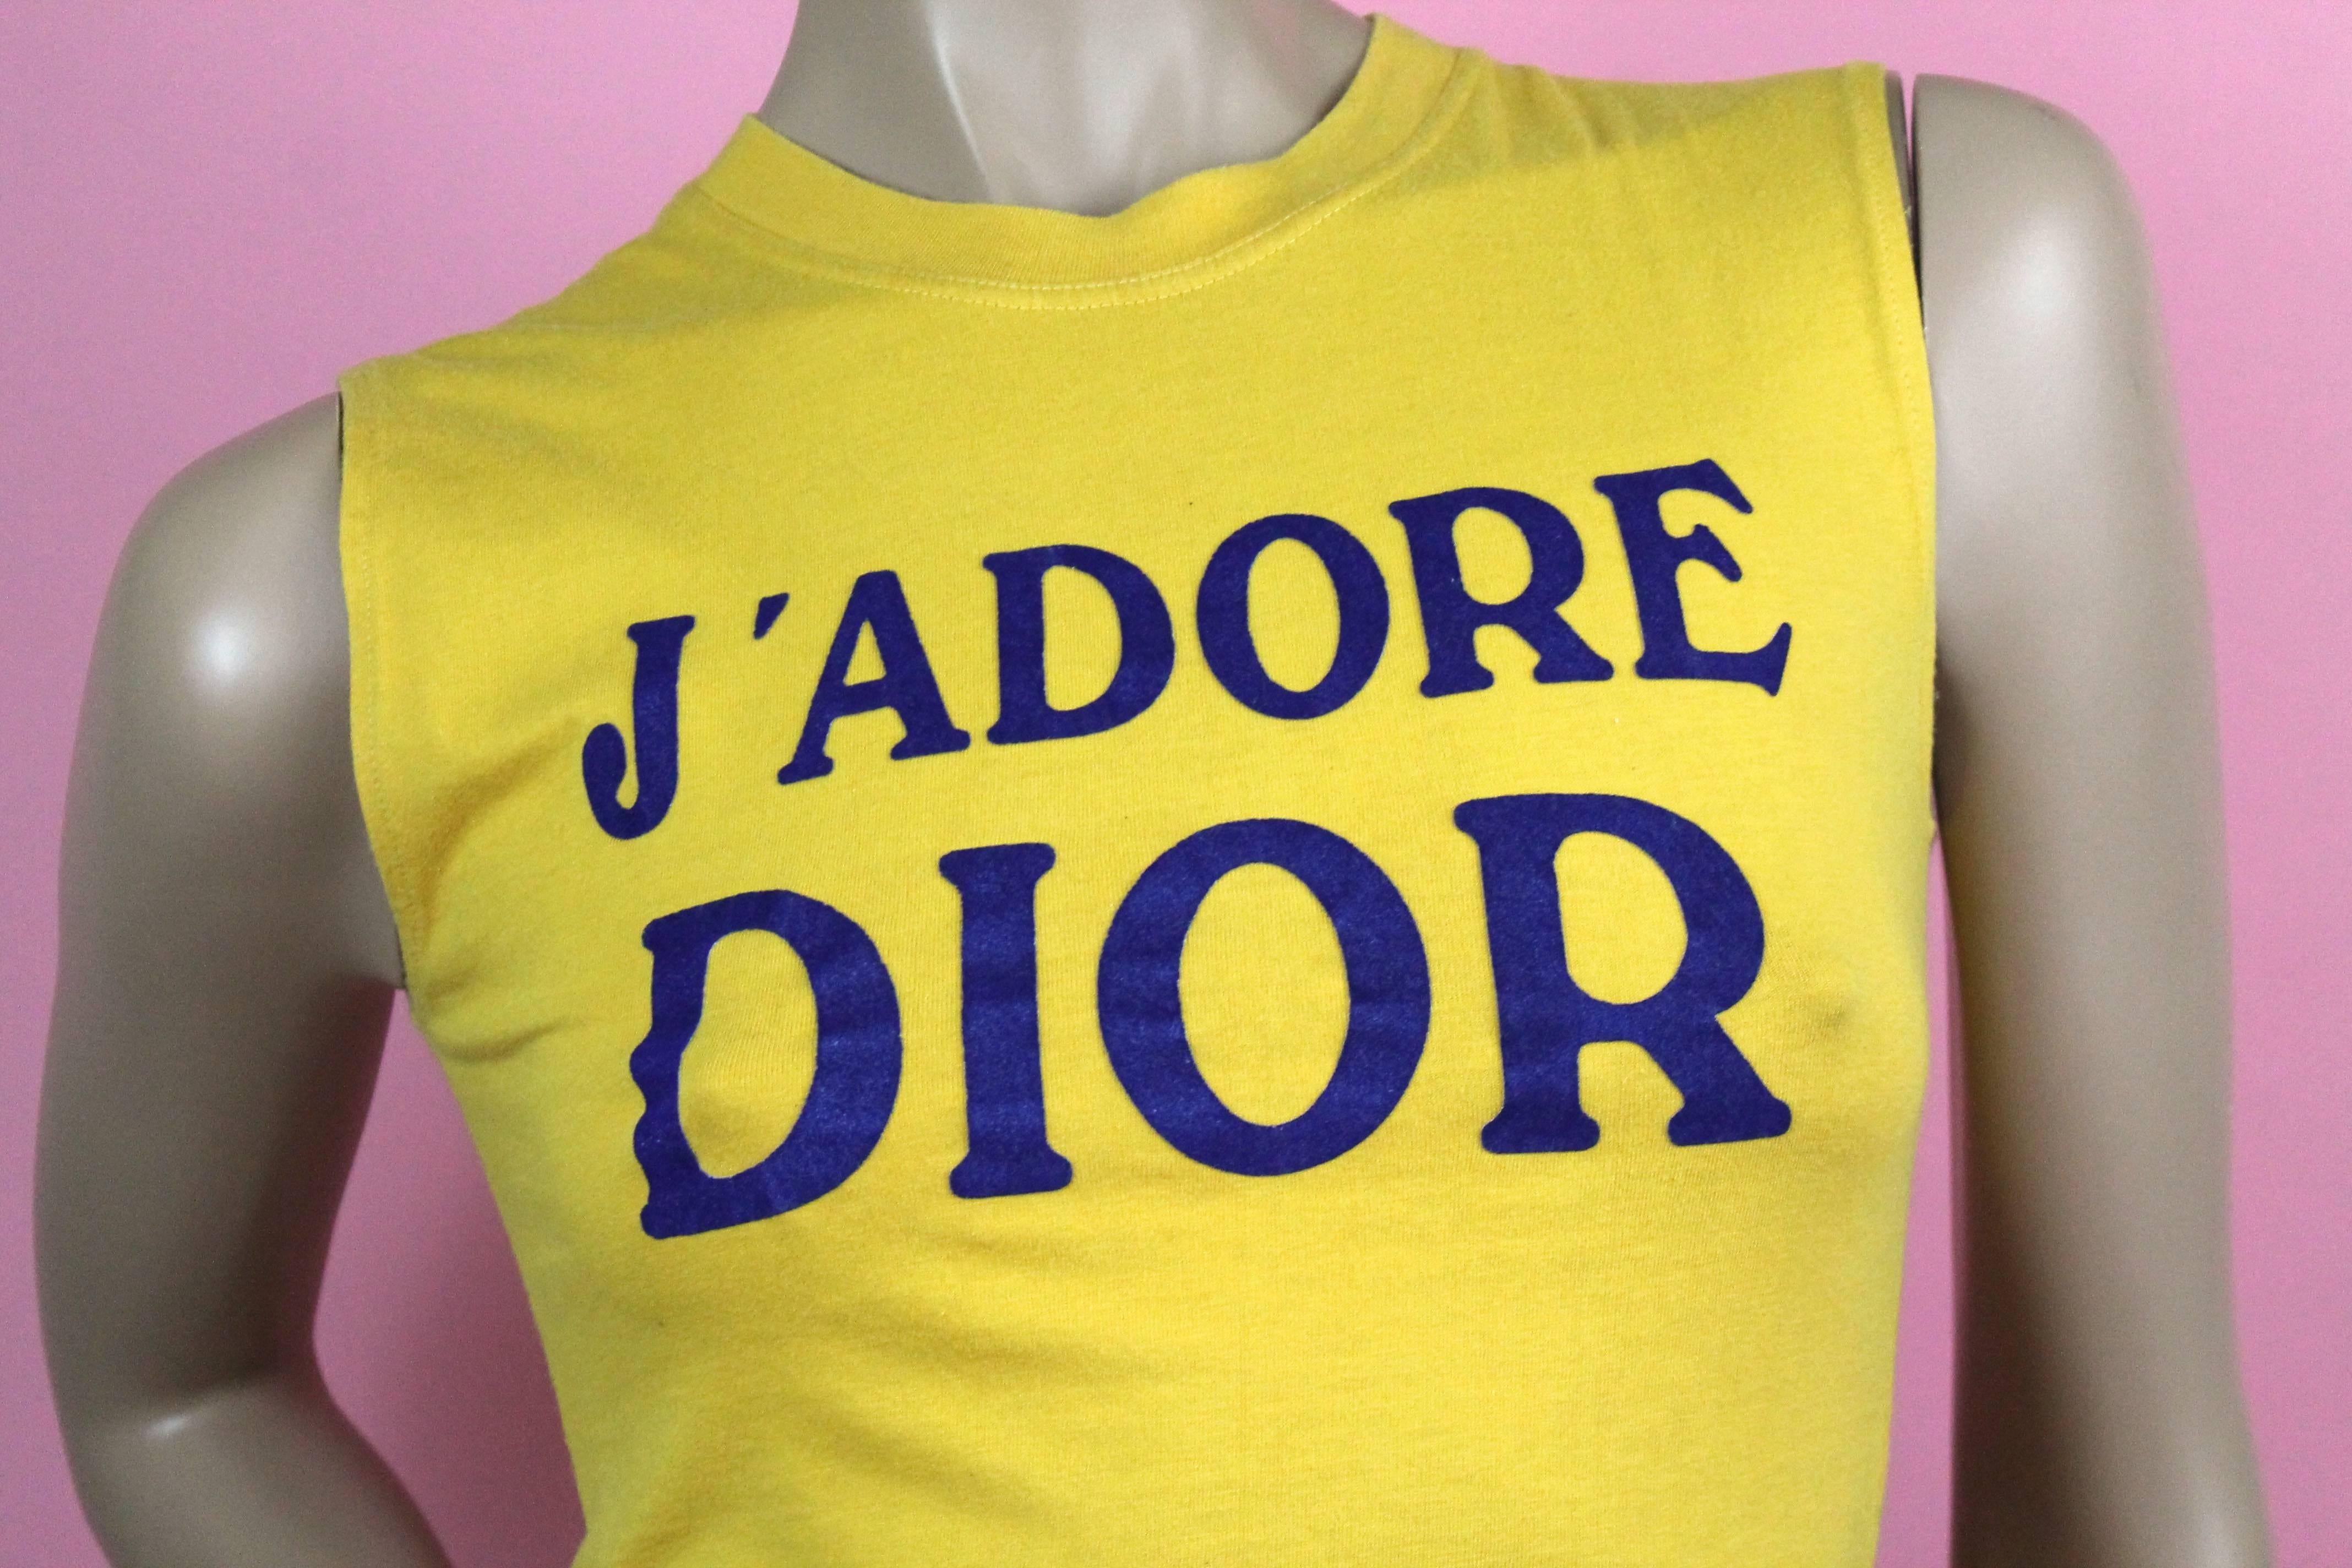 -Iconic Galliano for Diorpiece from the Autumn Winter 2001 runway show
-Features J'Adore Dior logo on the front and 